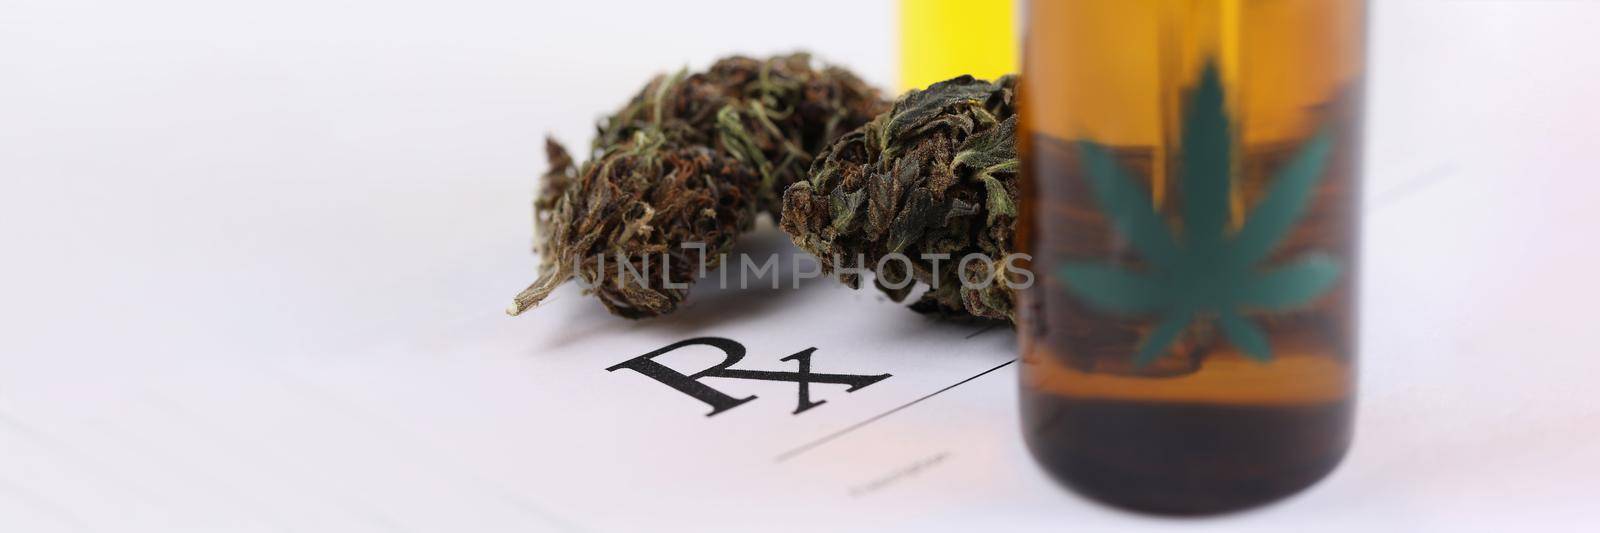 Medicinal cannabis with extract oil in bottle on prescription paper by kuprevich